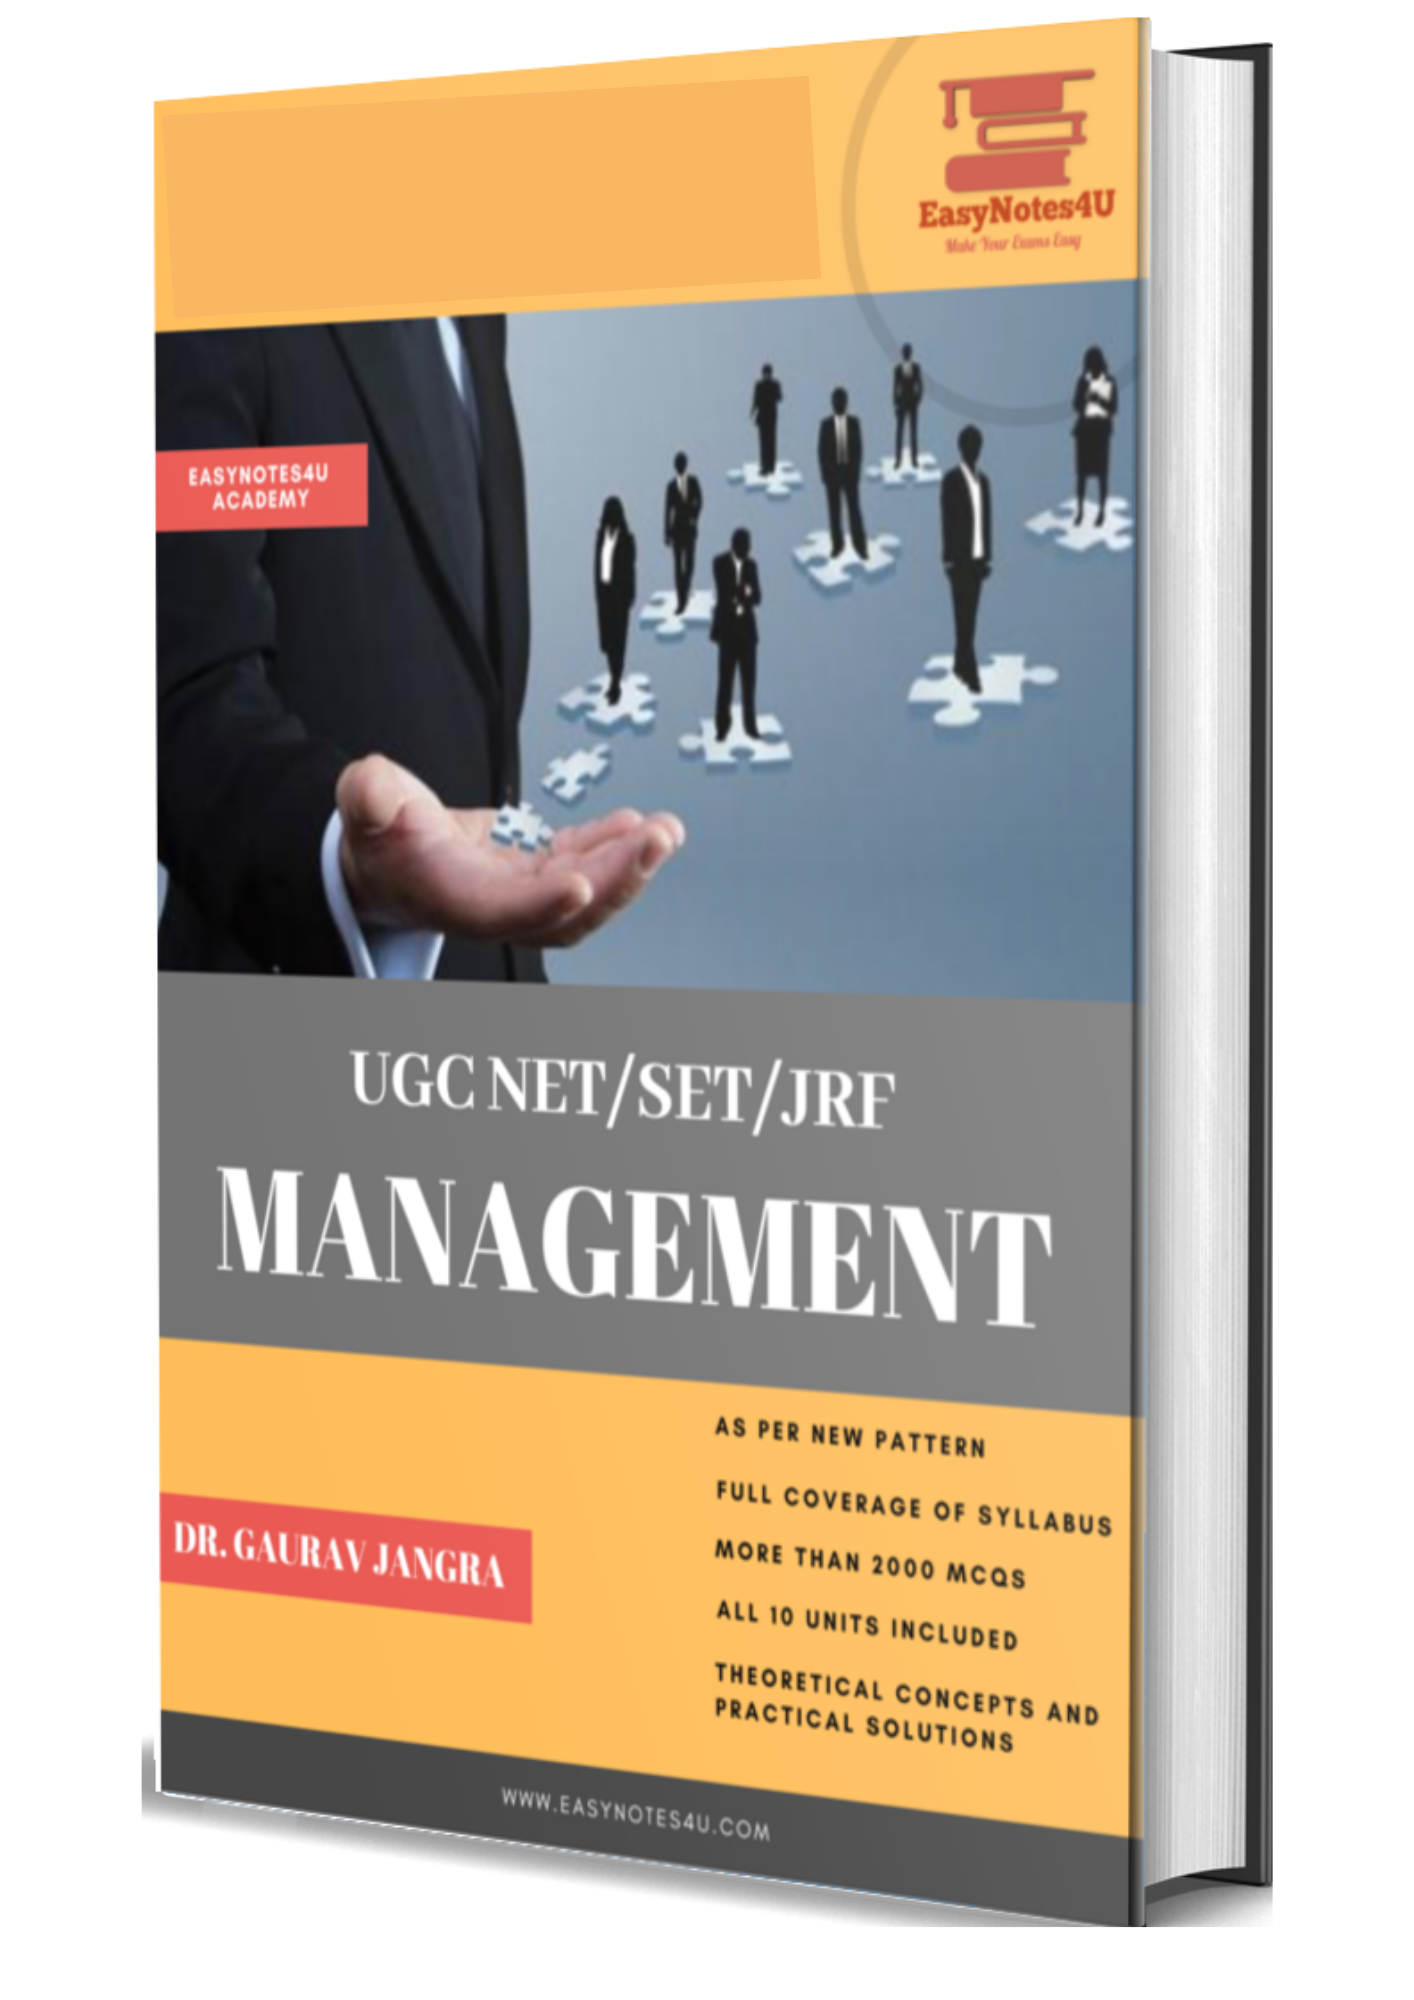 Study Material for UGC NET Management Book, ebook, pdf Notes, and Study Material by Dr. Gaurav Jangra as per the new syllabus and pattern are available unit-wise in printed Form. UGC NET for the subject Management Notes is divided into various units and every unit is divided into chapters followed by MCQs.